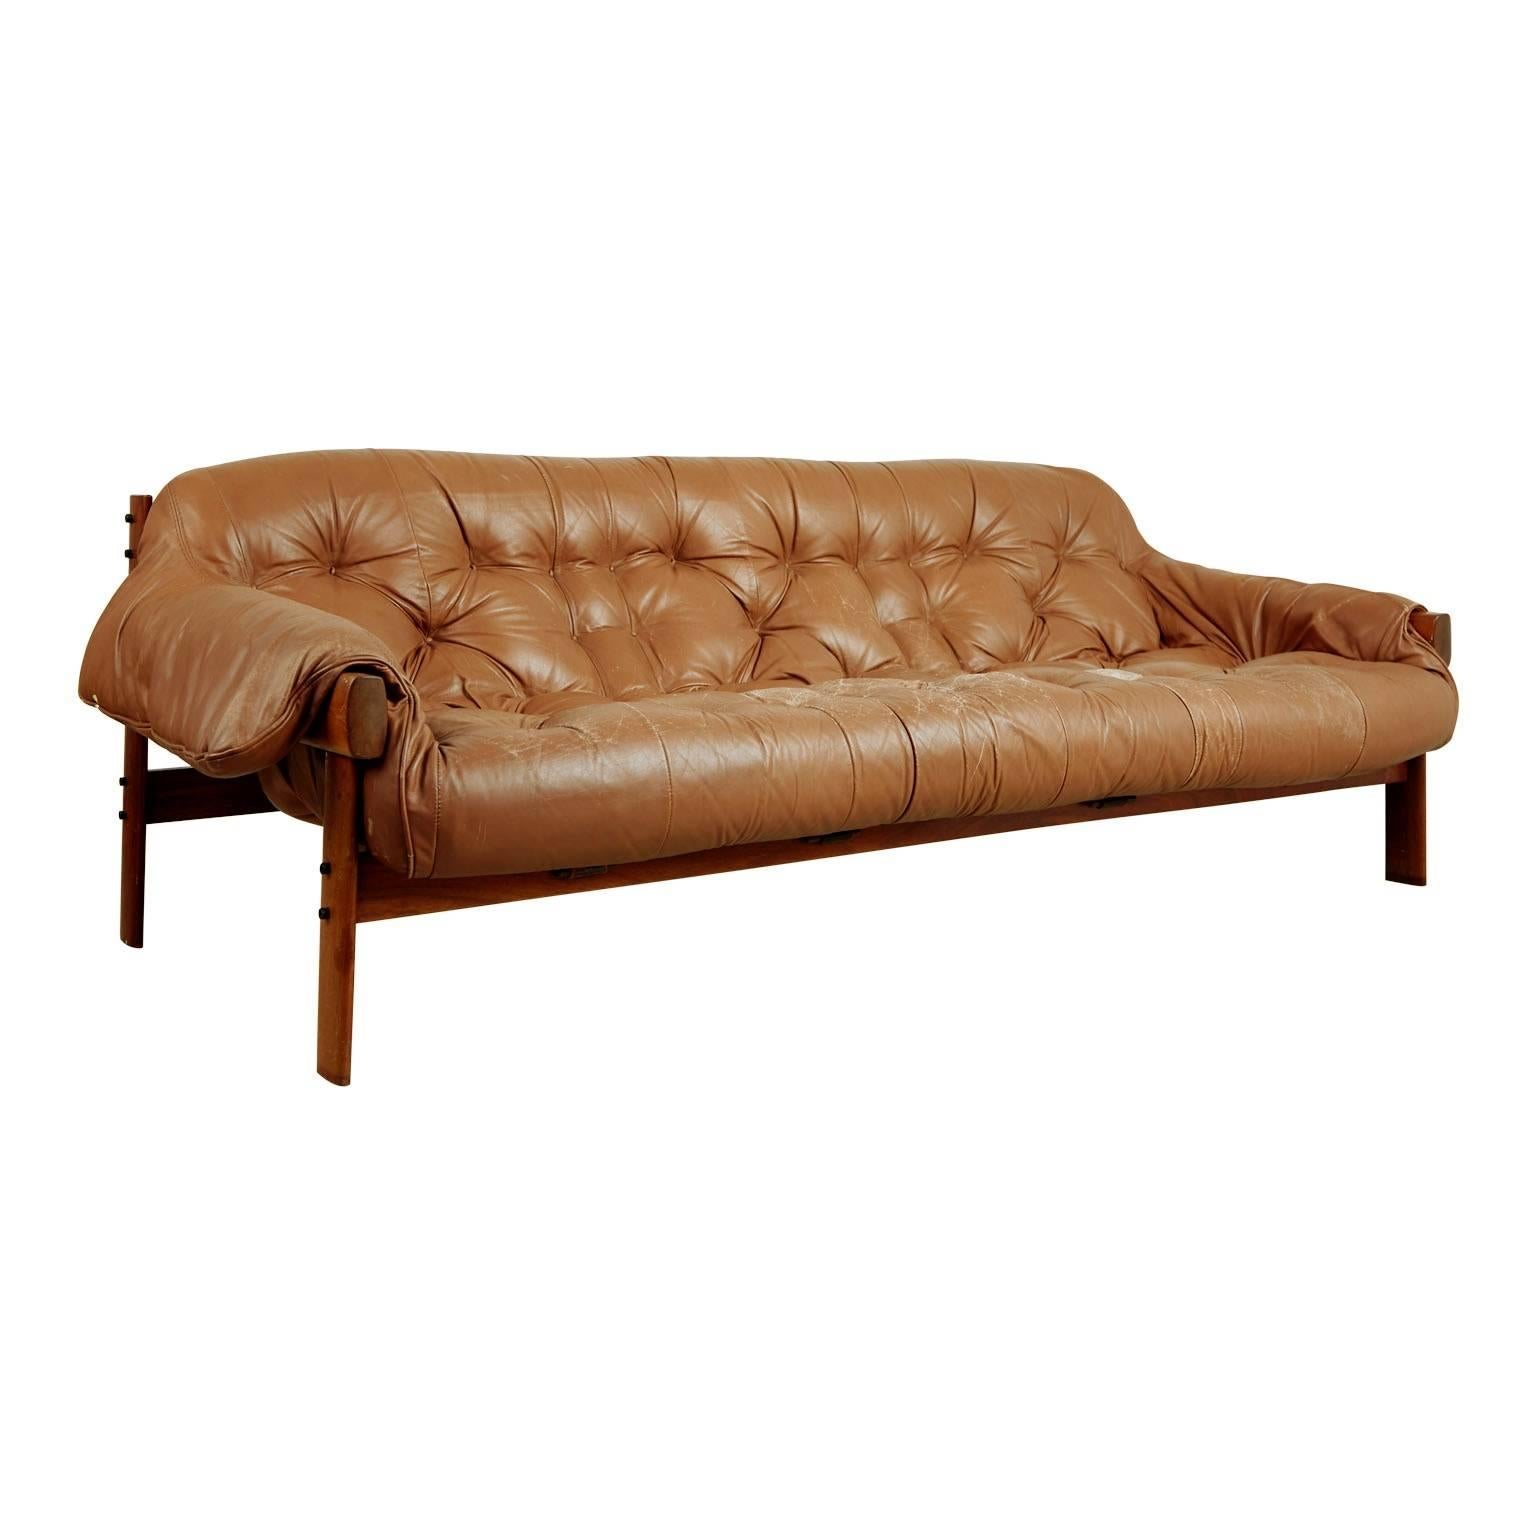 Wonderfully distressed brown leather sofa by Brazilian designer Percival Lafer for Lafer MP in 1961. Featuring a solid rosewood frame with beautiful grain that supports the natural leather straps which the tufted brown leather cushion rests on. The